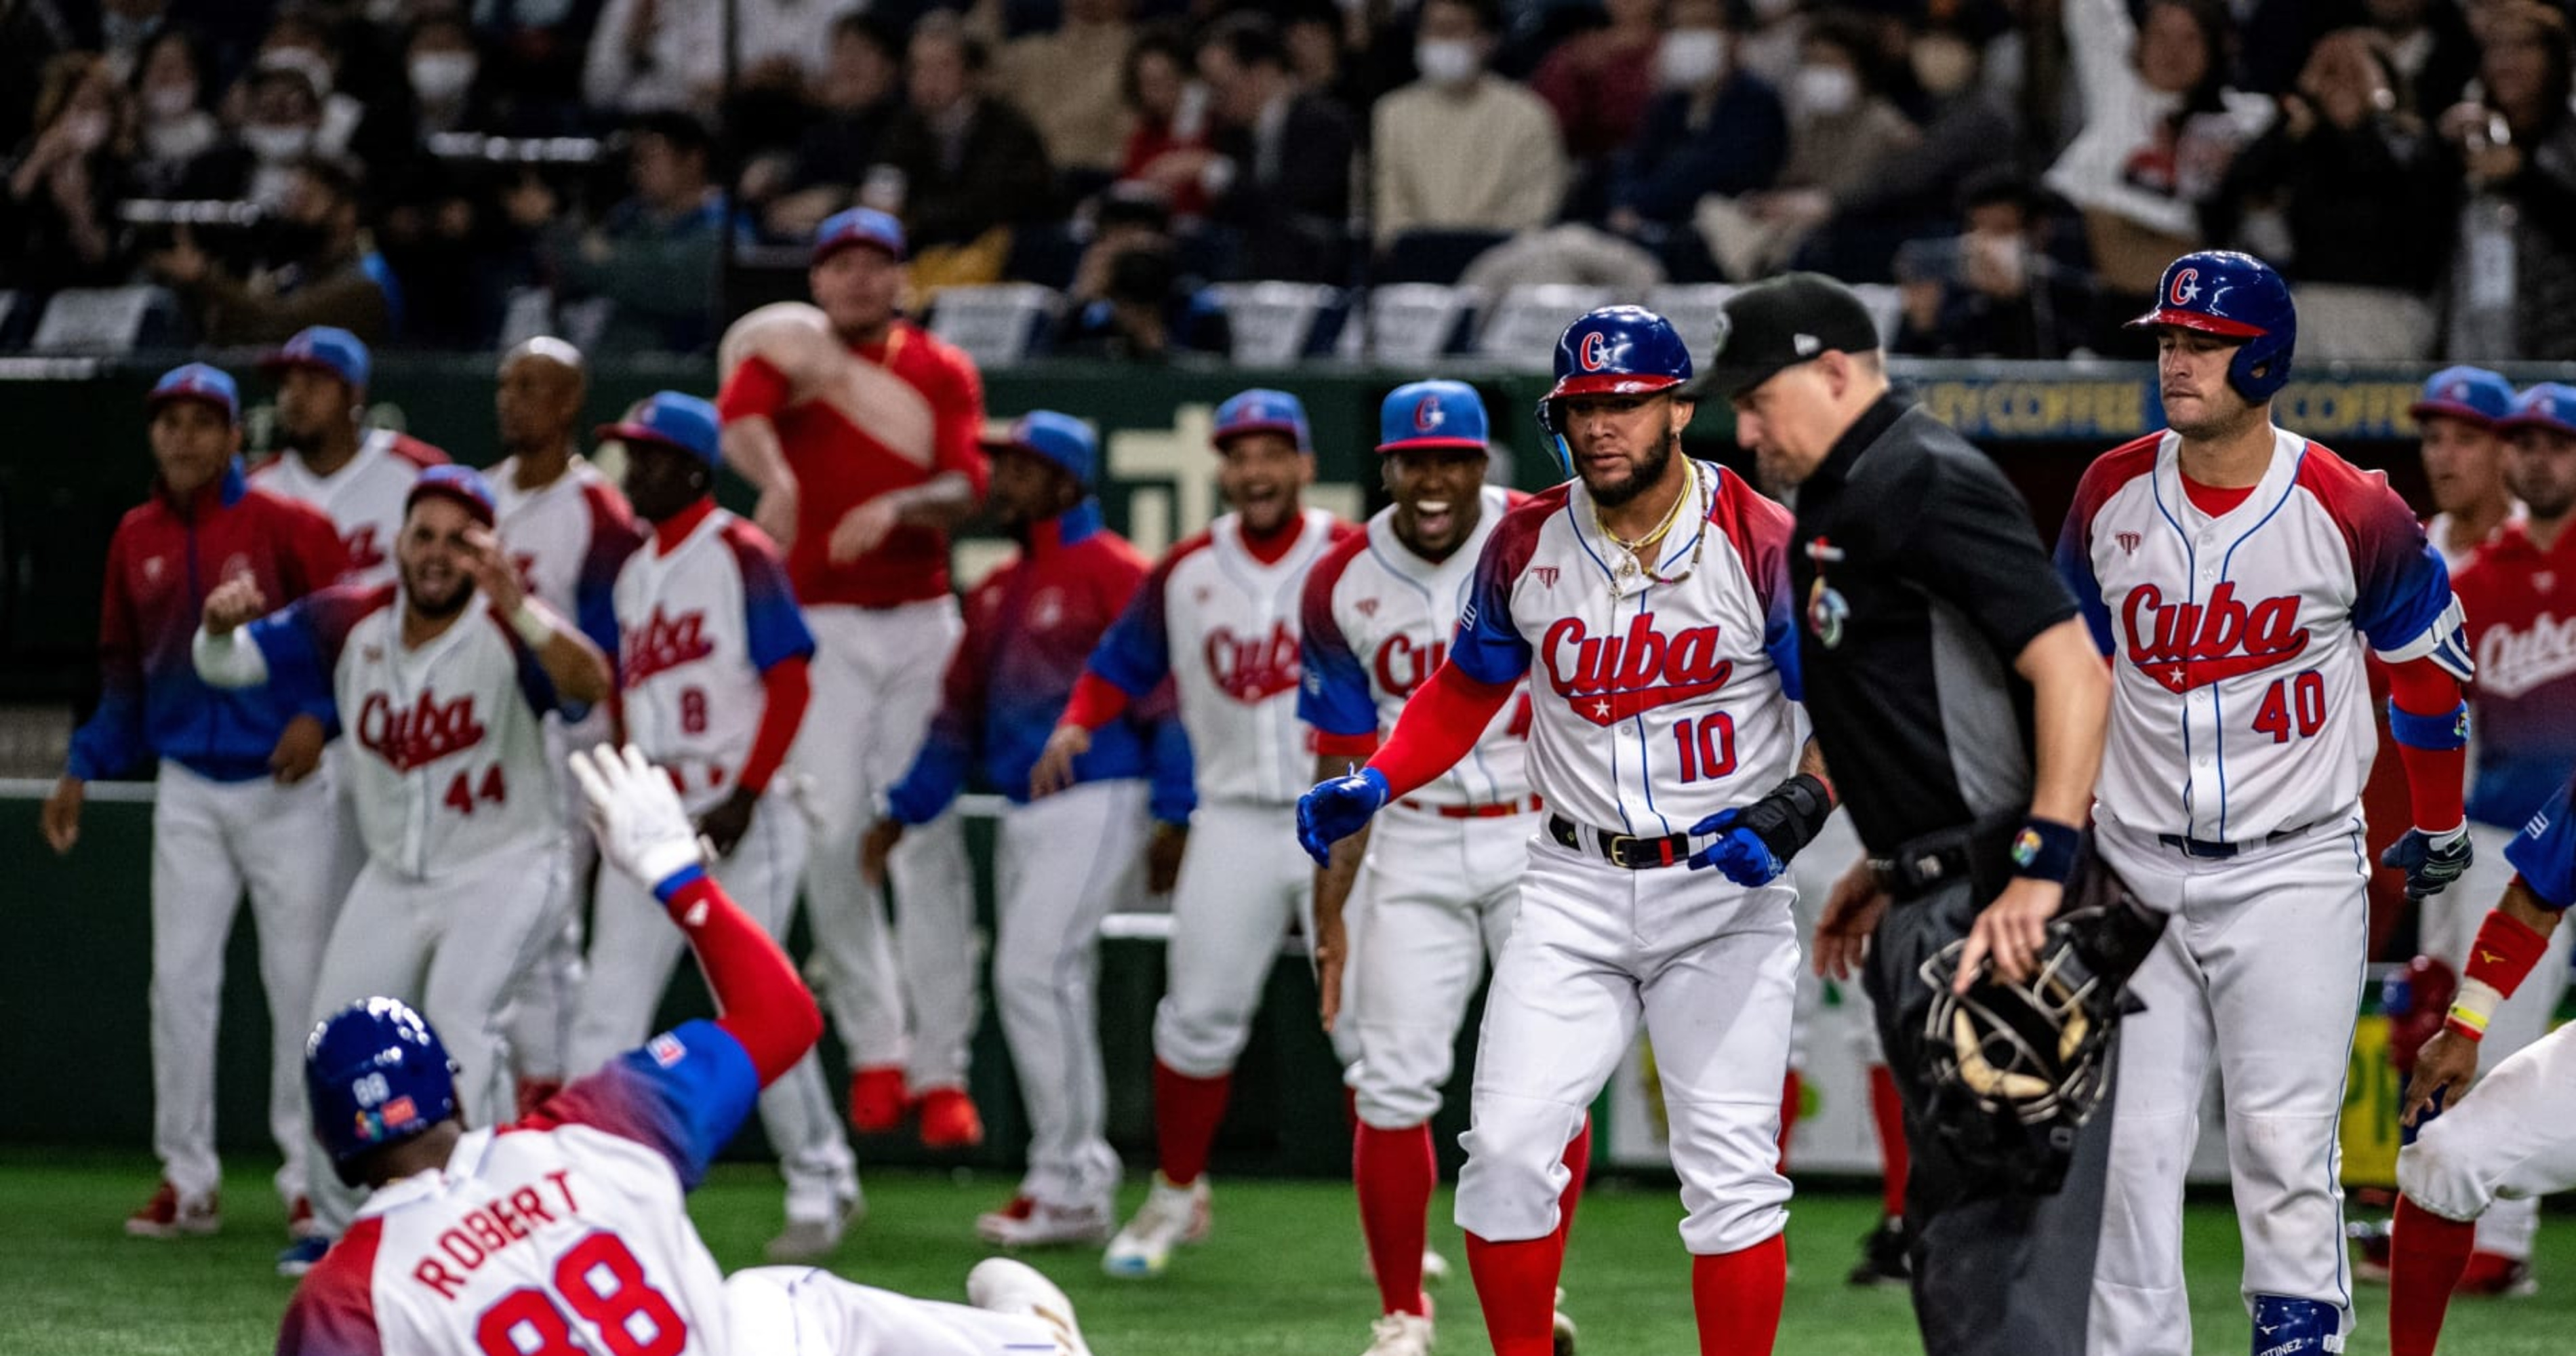 World Baseball Classic 2023: Scores and Reaction from Saturday Pool Play  Results, News, Scores, Highlights, Stats, and Rumors